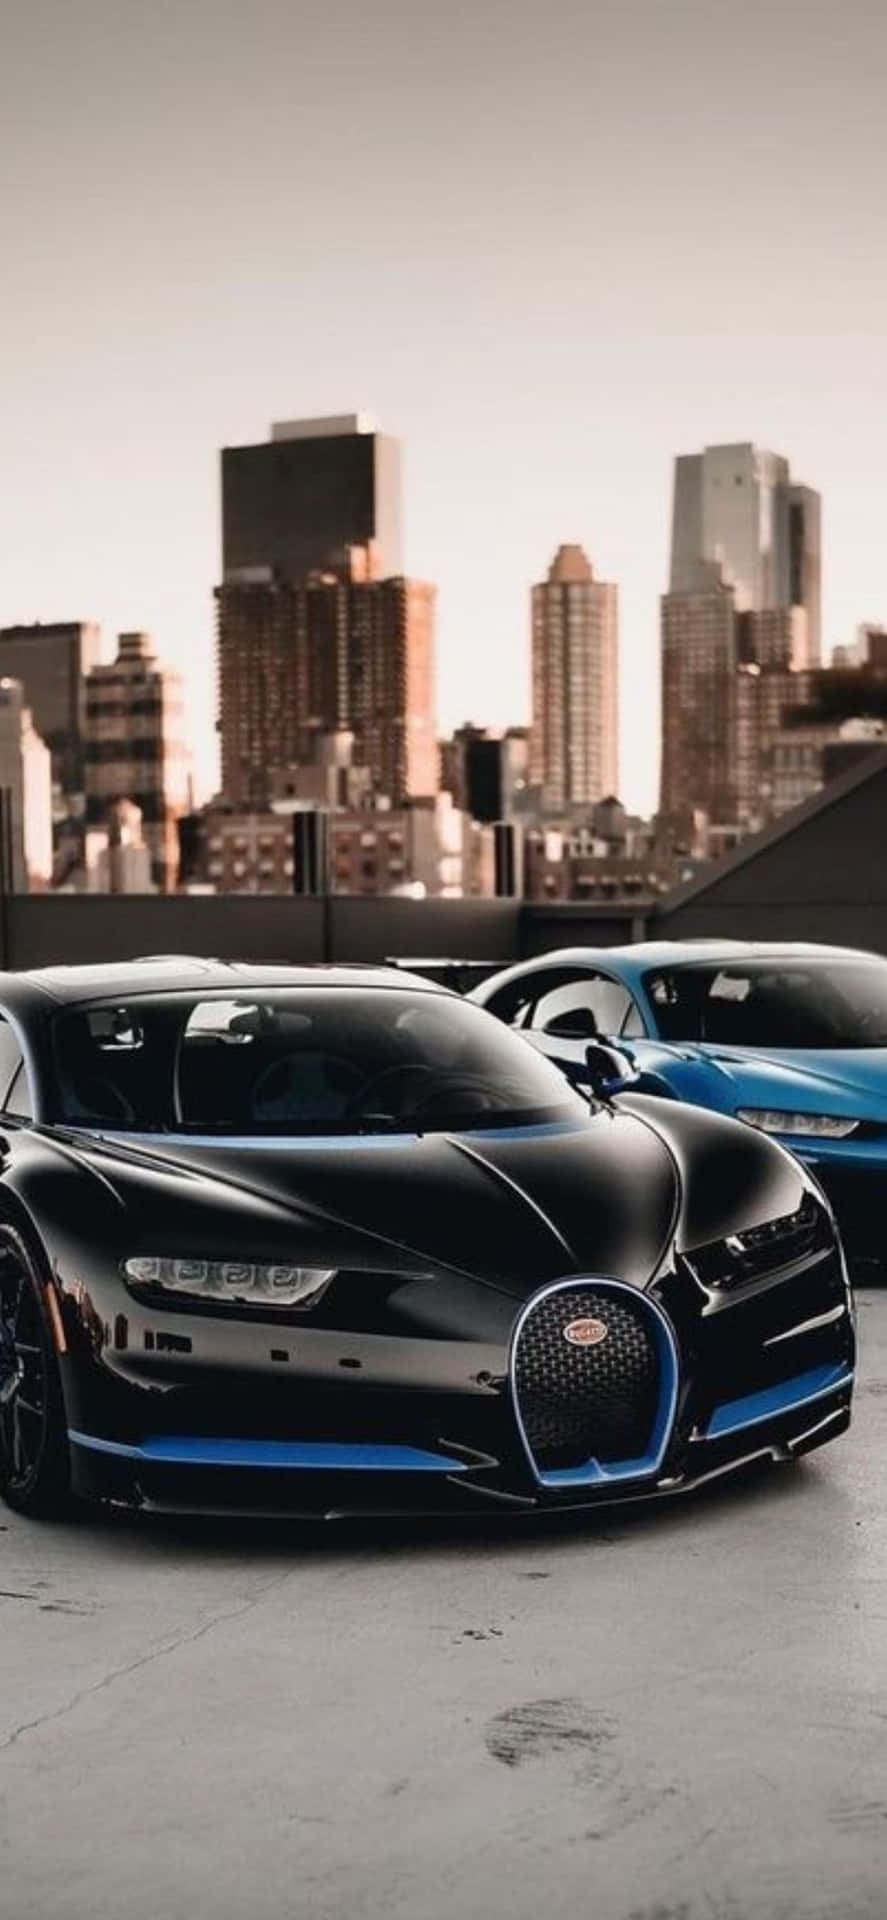 The Iconic Bugatti and Innovative iPhone Xs Working in Perfect Harmon